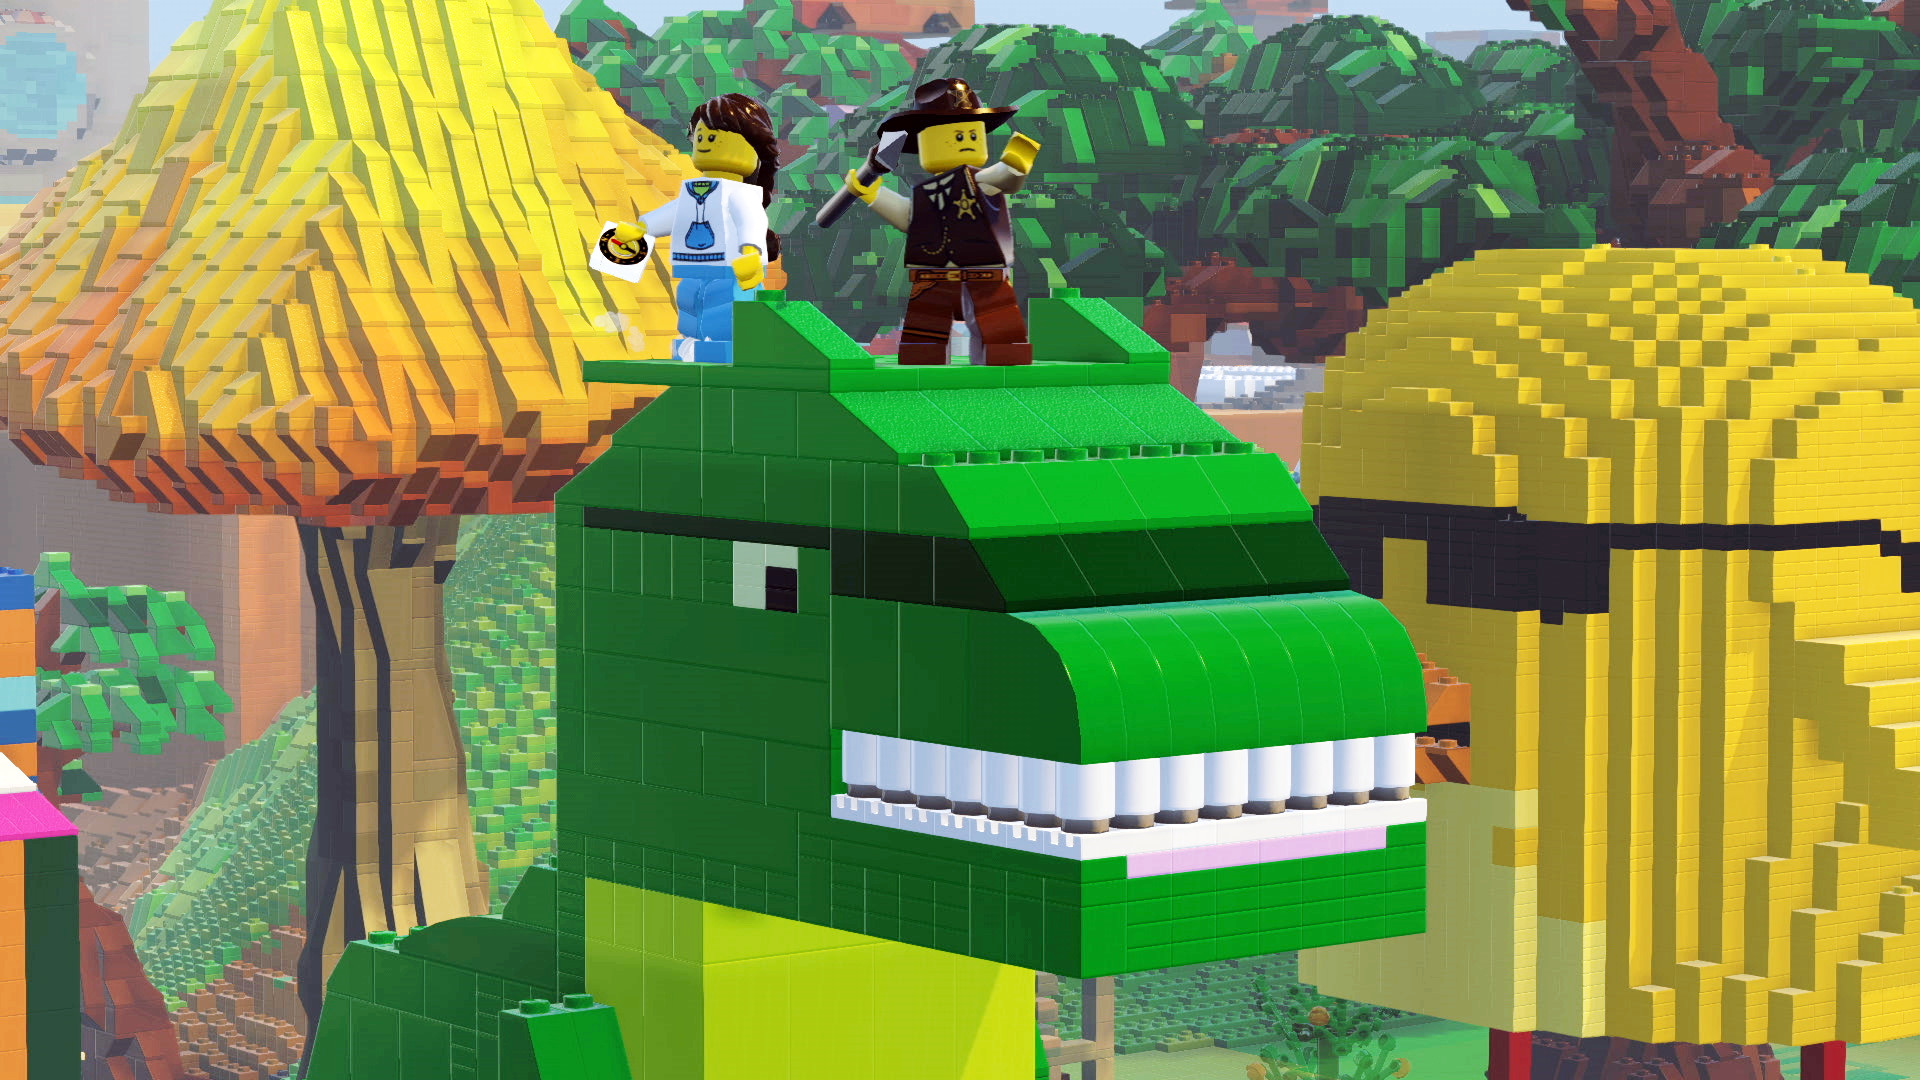 lego worlds the game